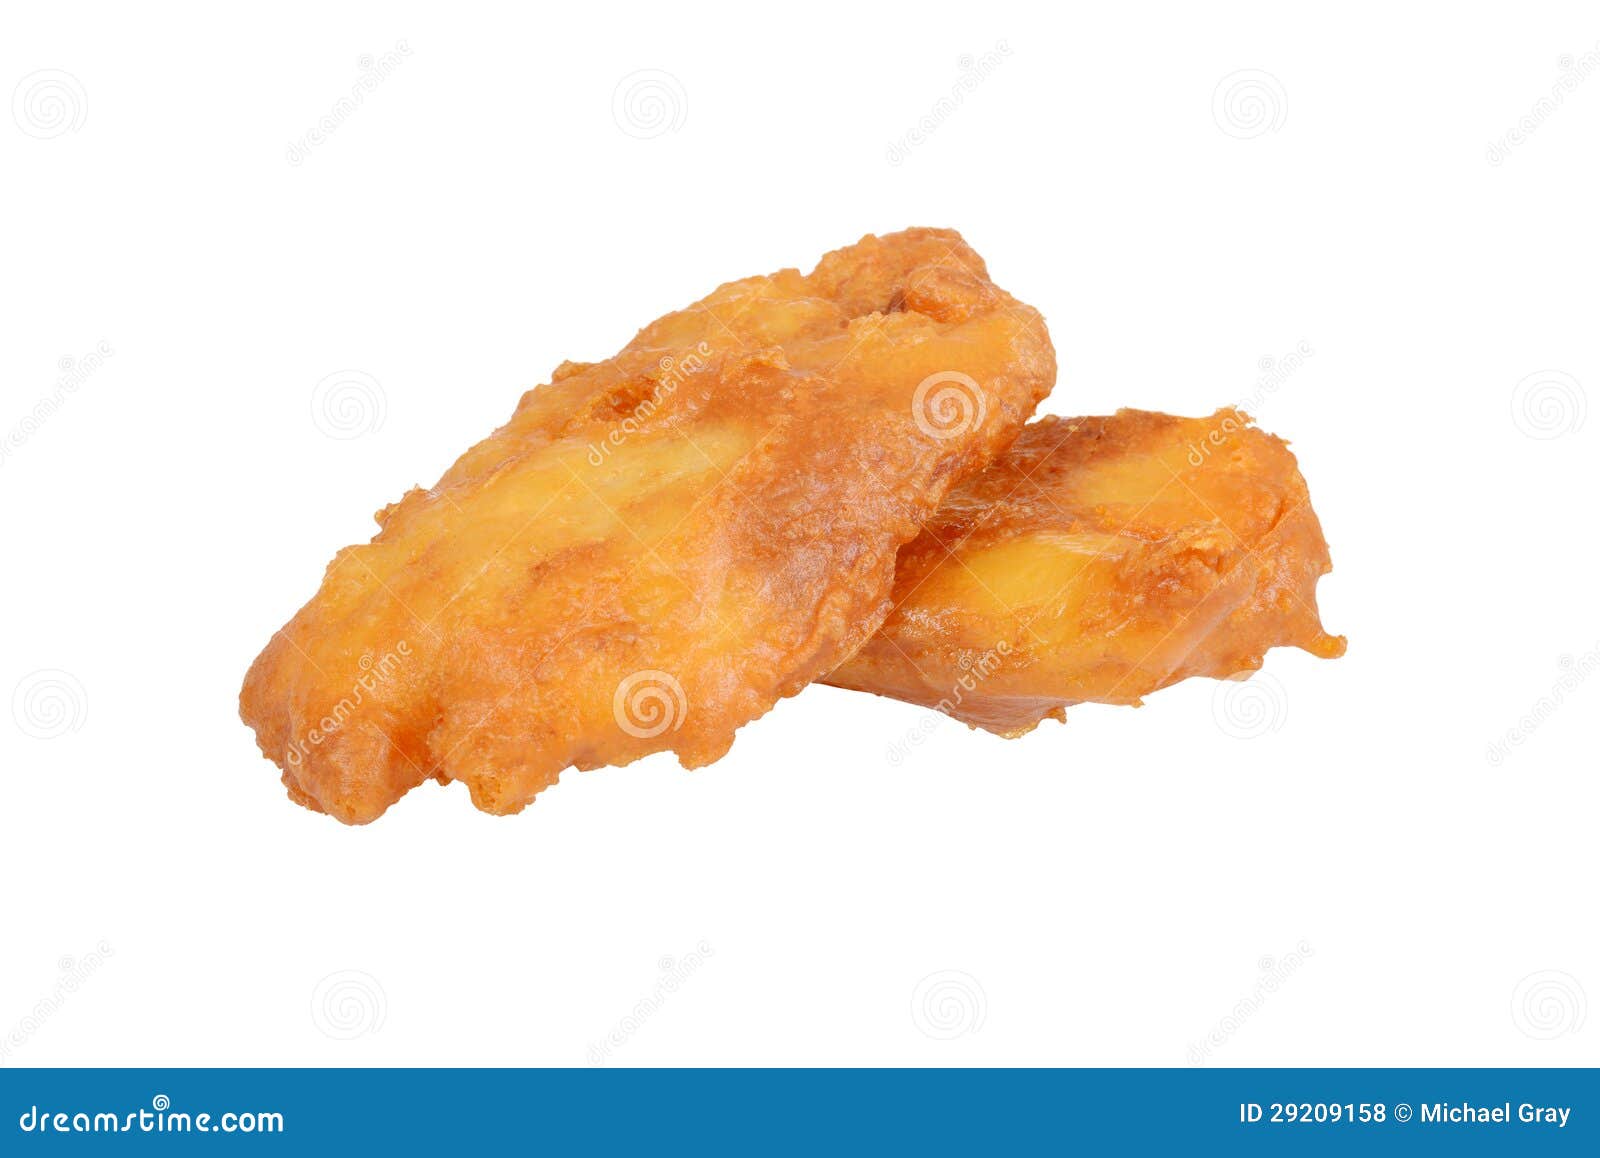 7 866 Haddock Fish Photos Free Royalty Free Stock Photos From Dreamstime